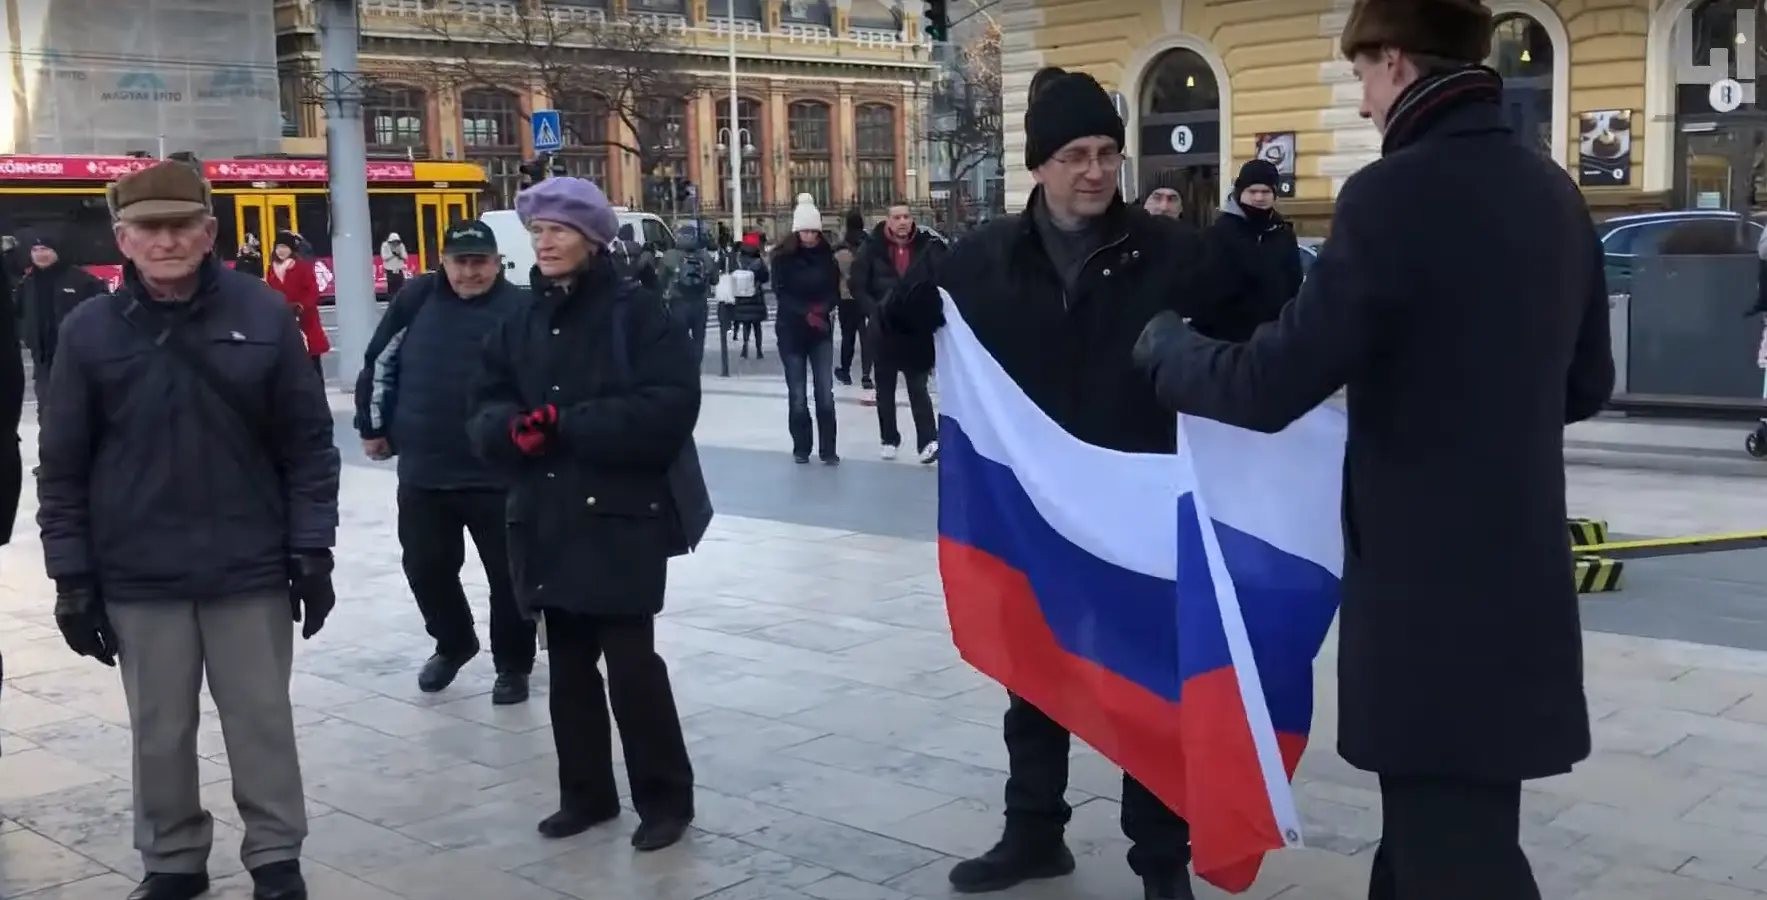 PHOTOS, VIDEOS: Pro-Russian demonstrations in Budapest had a surprising turnout